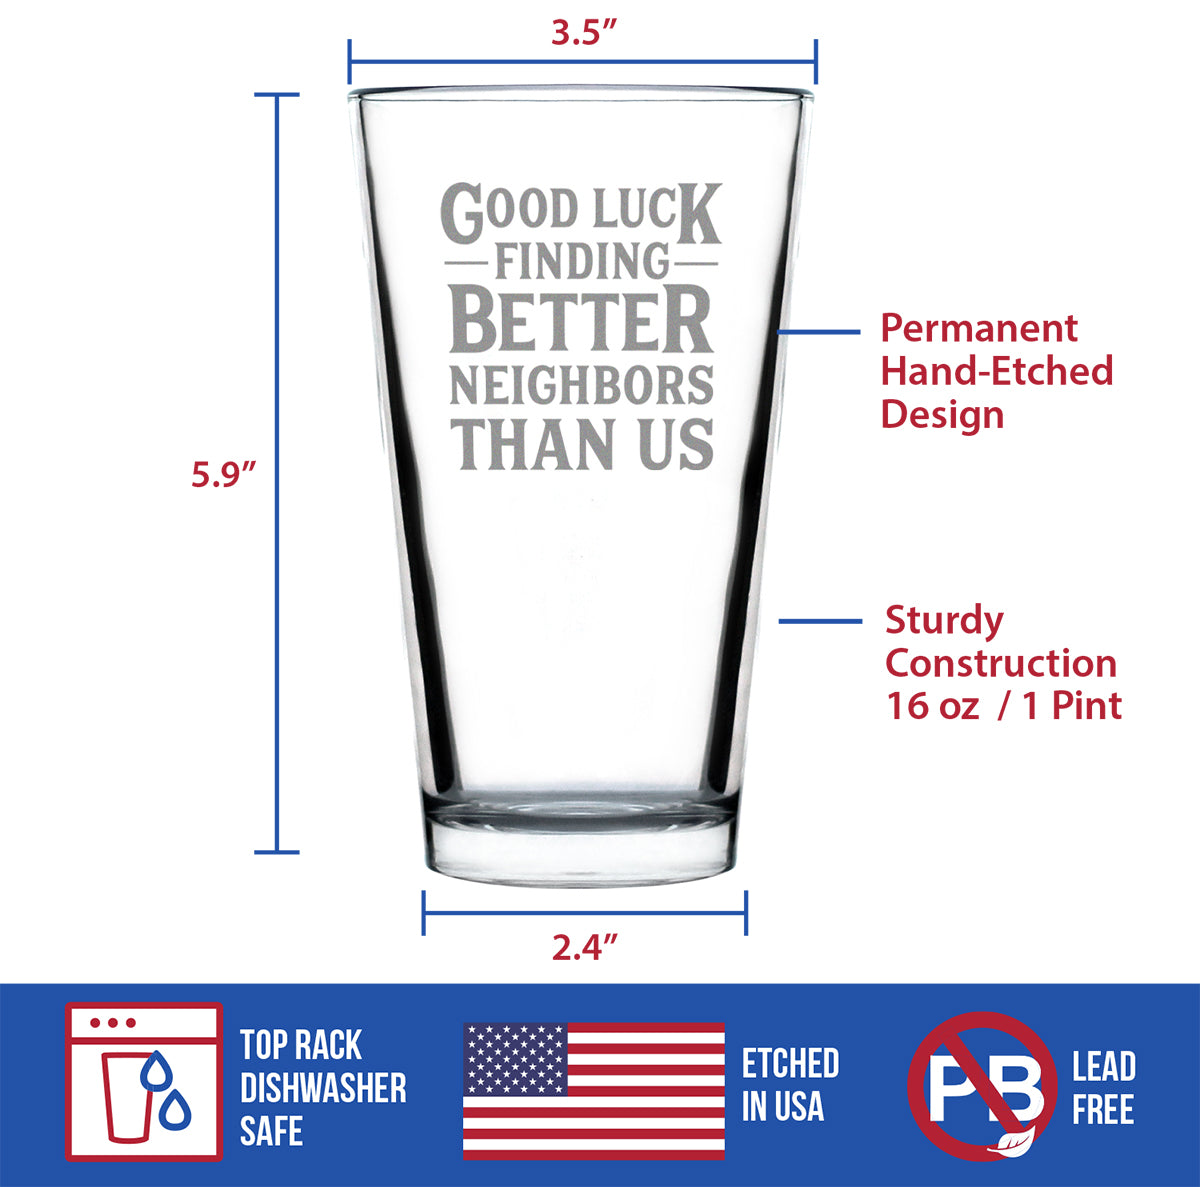 Good Luck Finding Better Neighbors Than Us - Pint Glass for Beer - Funny Farewell Gift For The Best Neighbor Moving Away - 16 oz Glasses